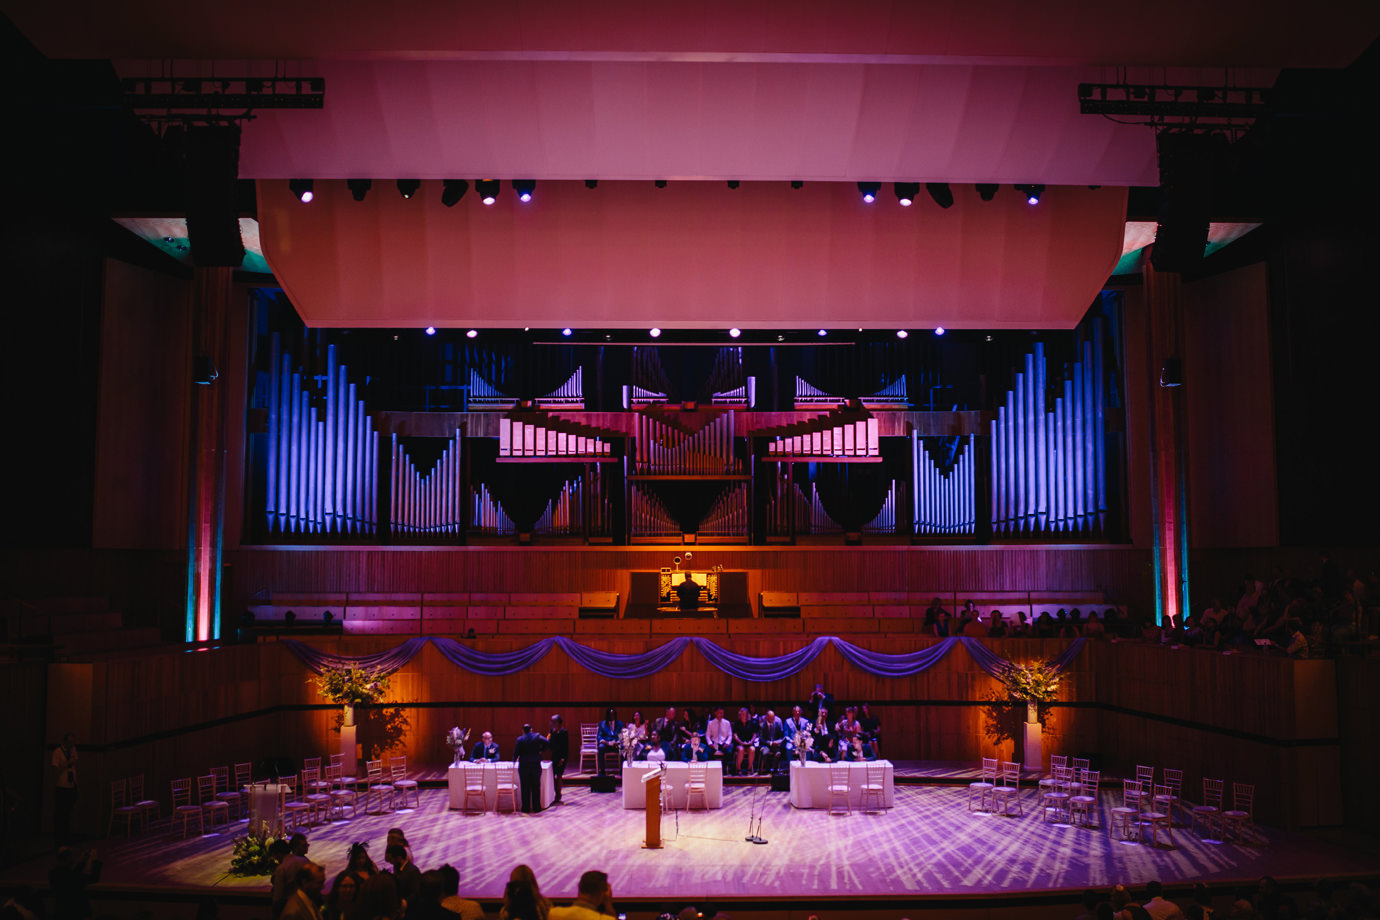 The Royal Festival Hall, ready for the Festival of love